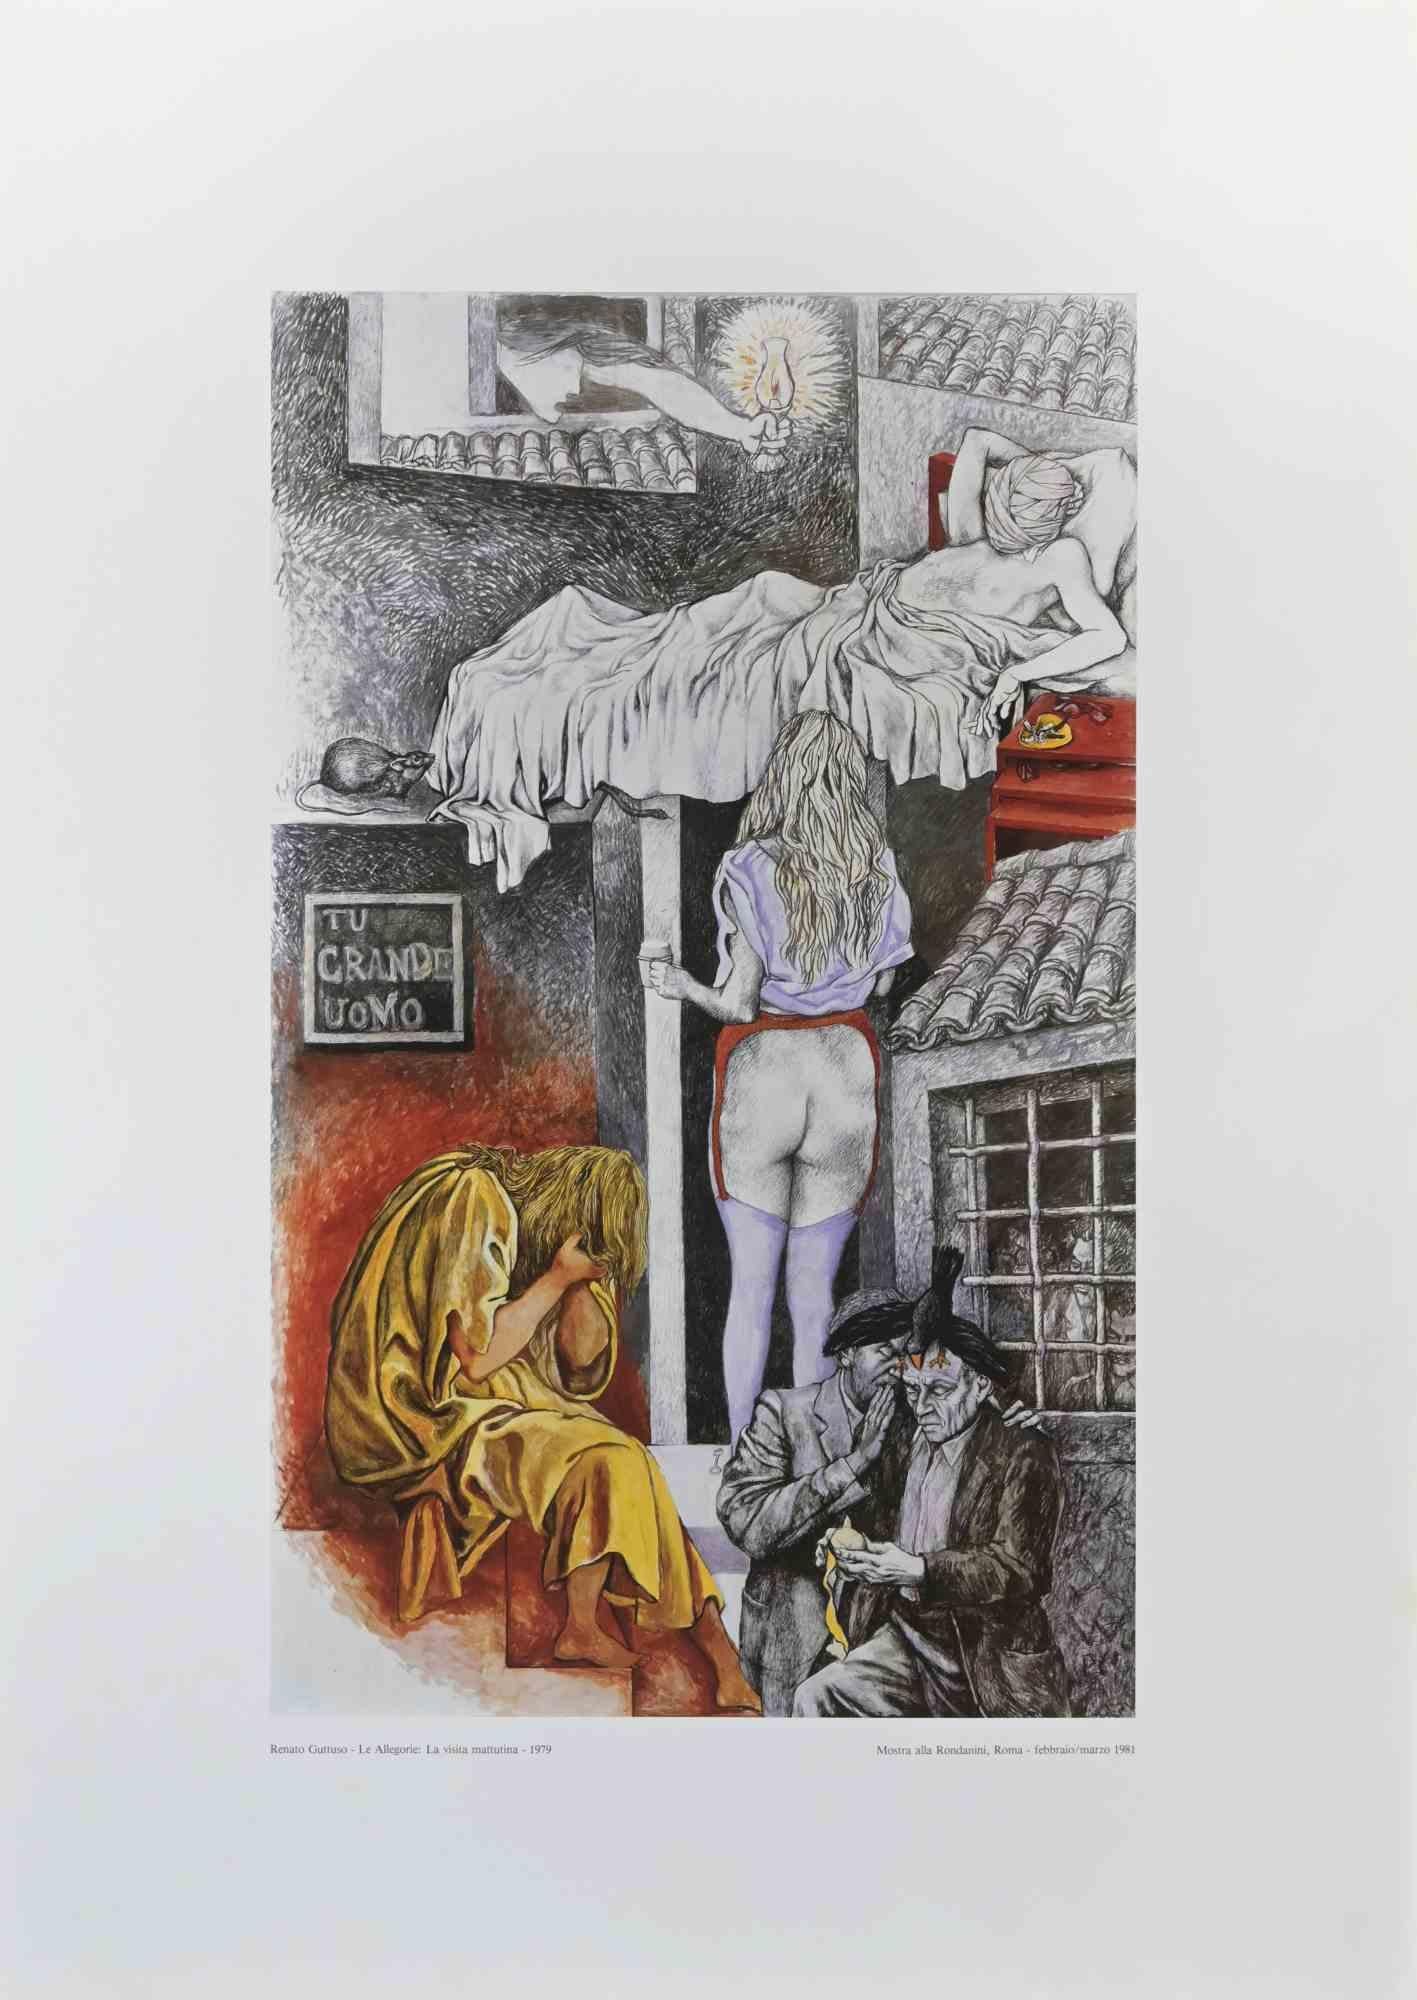 Allegories: the Morning Visit  is a vintage poster realized by the Italian artist  Renato Guttuso  (Bagheria, 1911 – Rome, 1987) in  1981

Original Colored Offset on paper. 

The artwork was realized on the occasion of the exhibition realized in